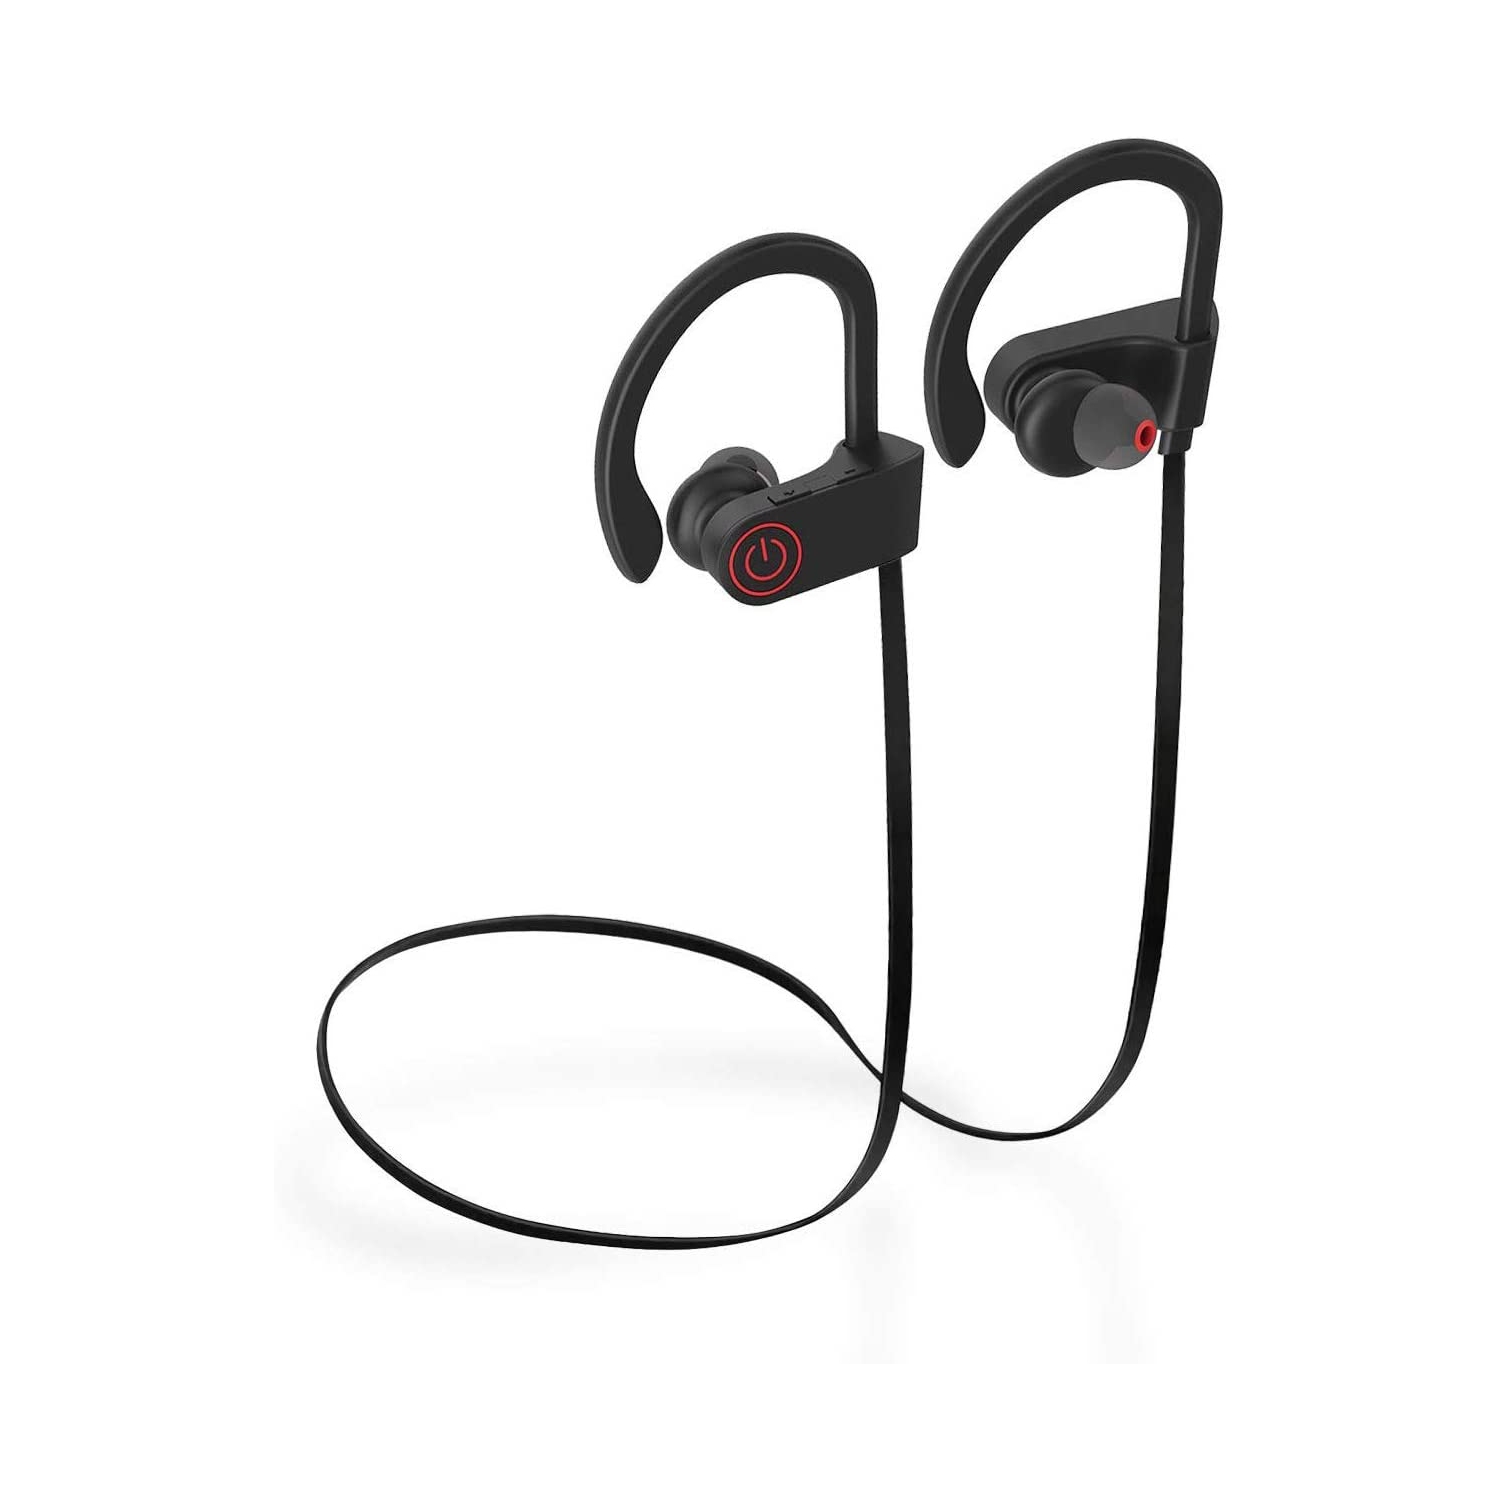 Dolaer Newest Bluetooth Headphones Best Mic Wireless Sport Earphones HiFi Bass Stereo IPX7 Waterproof in-Ear Earbuds Headset with Noise Canceling for Workout Running Gym 7 Hours Pl